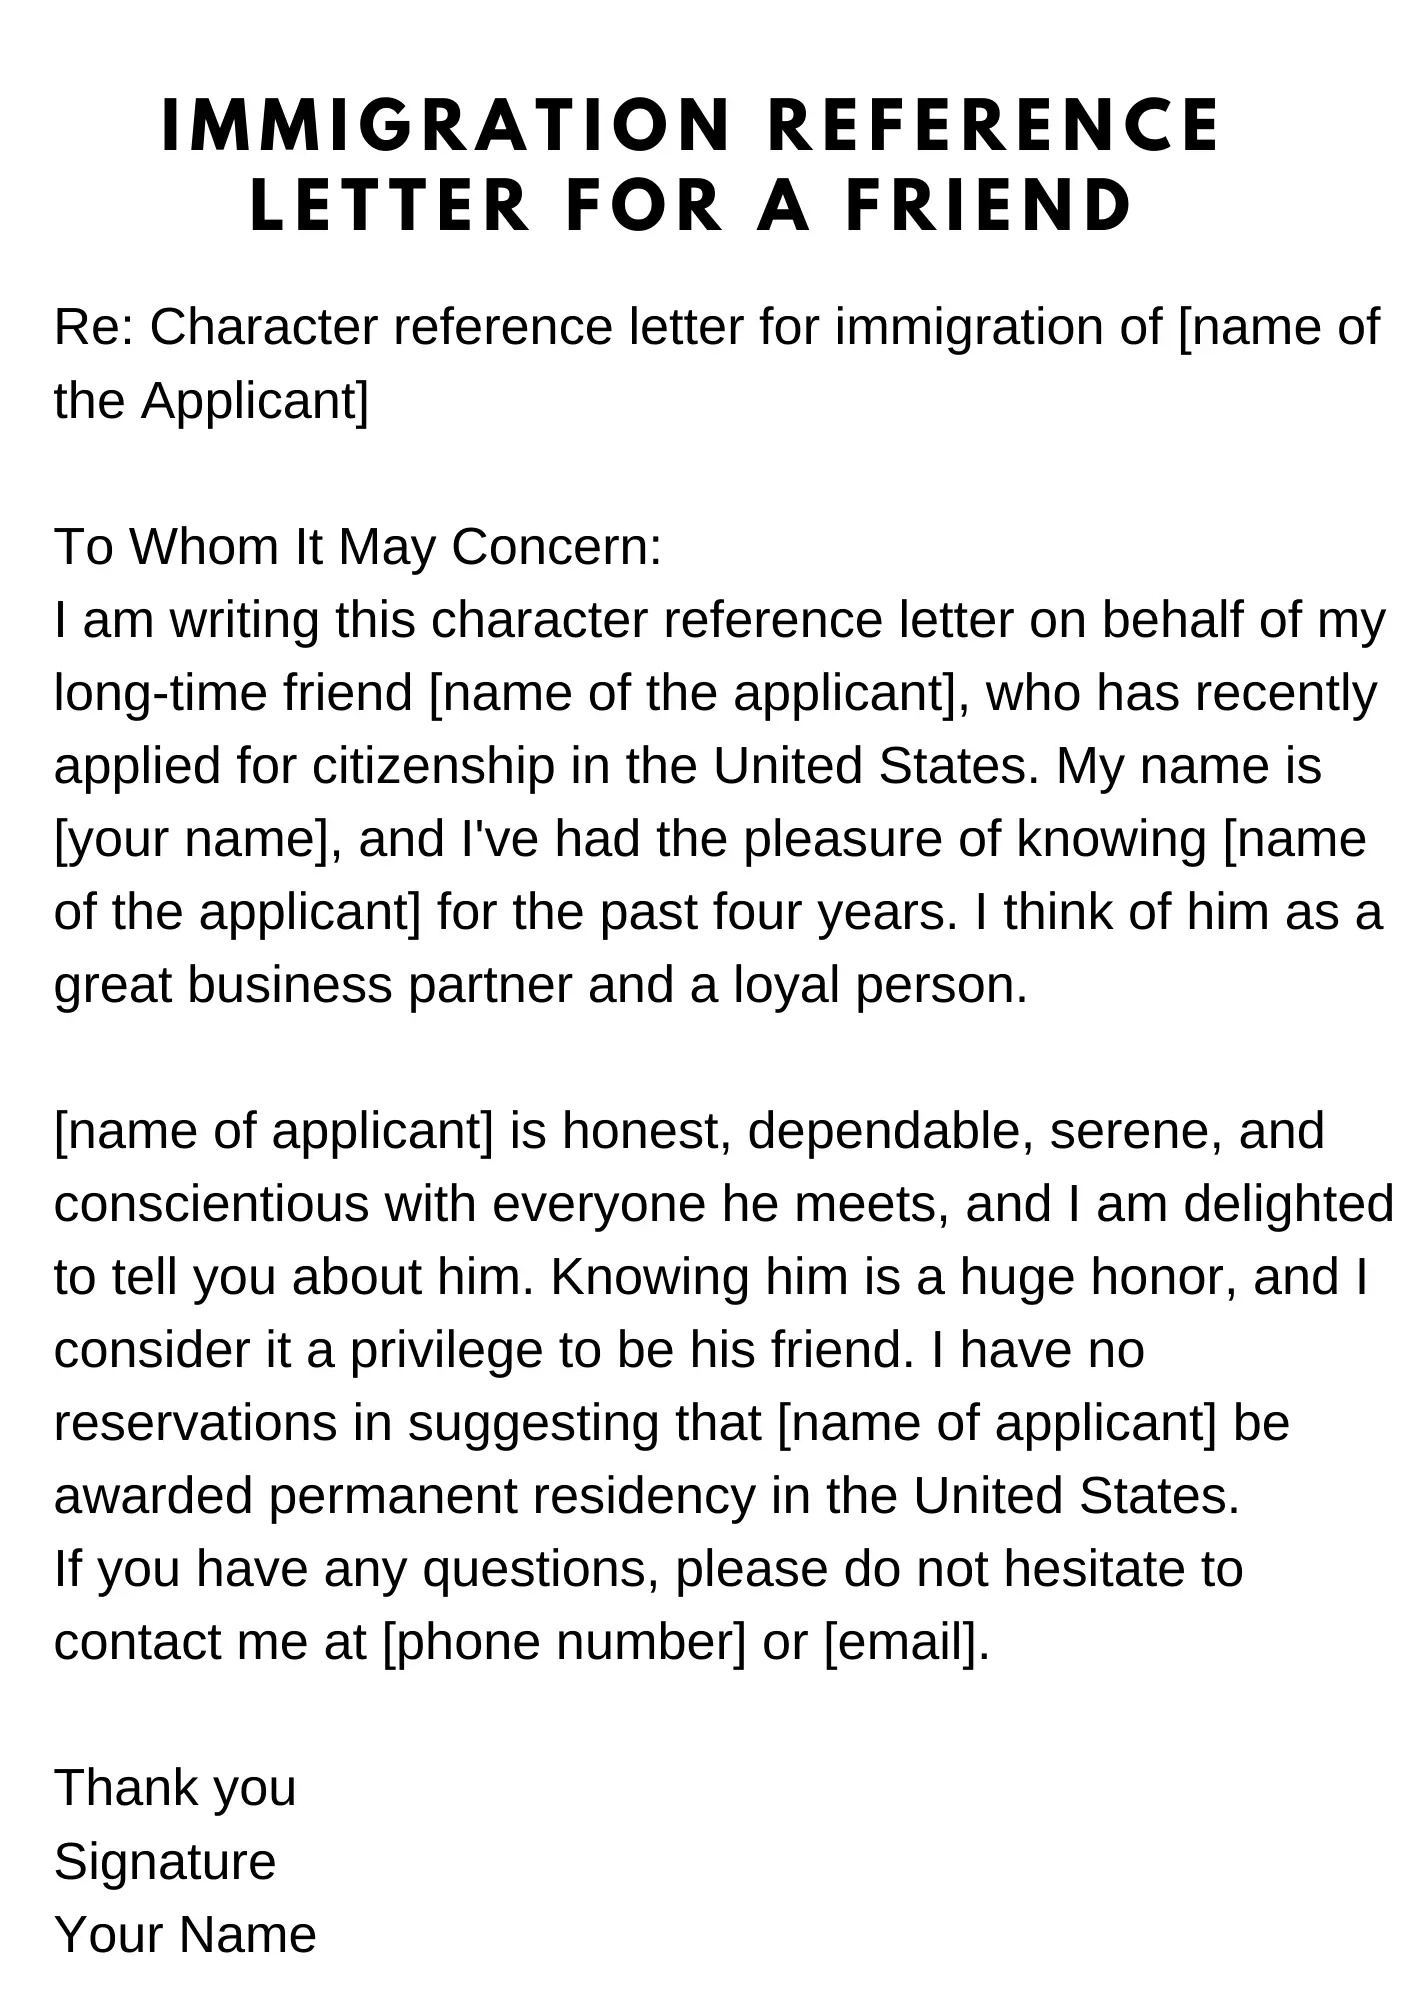 sample immigration reference letter for a friend